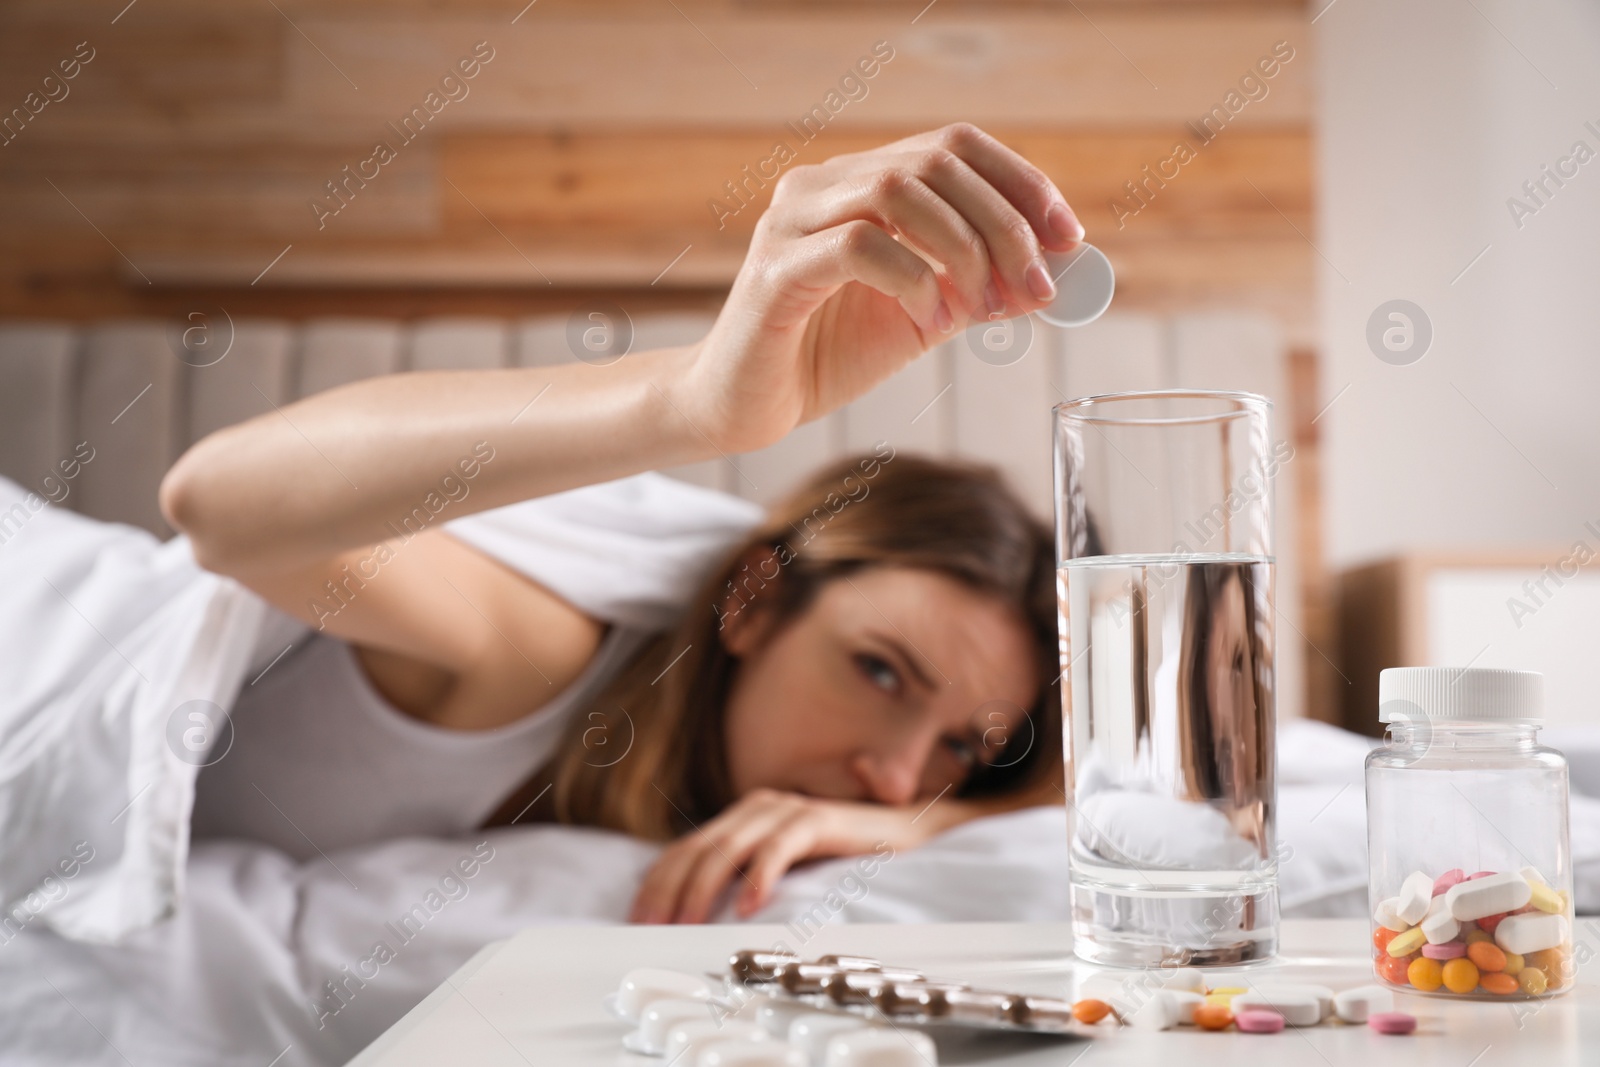 Photo of Woman putting medicine for hangover into glass of water at home, focus on hand with pill